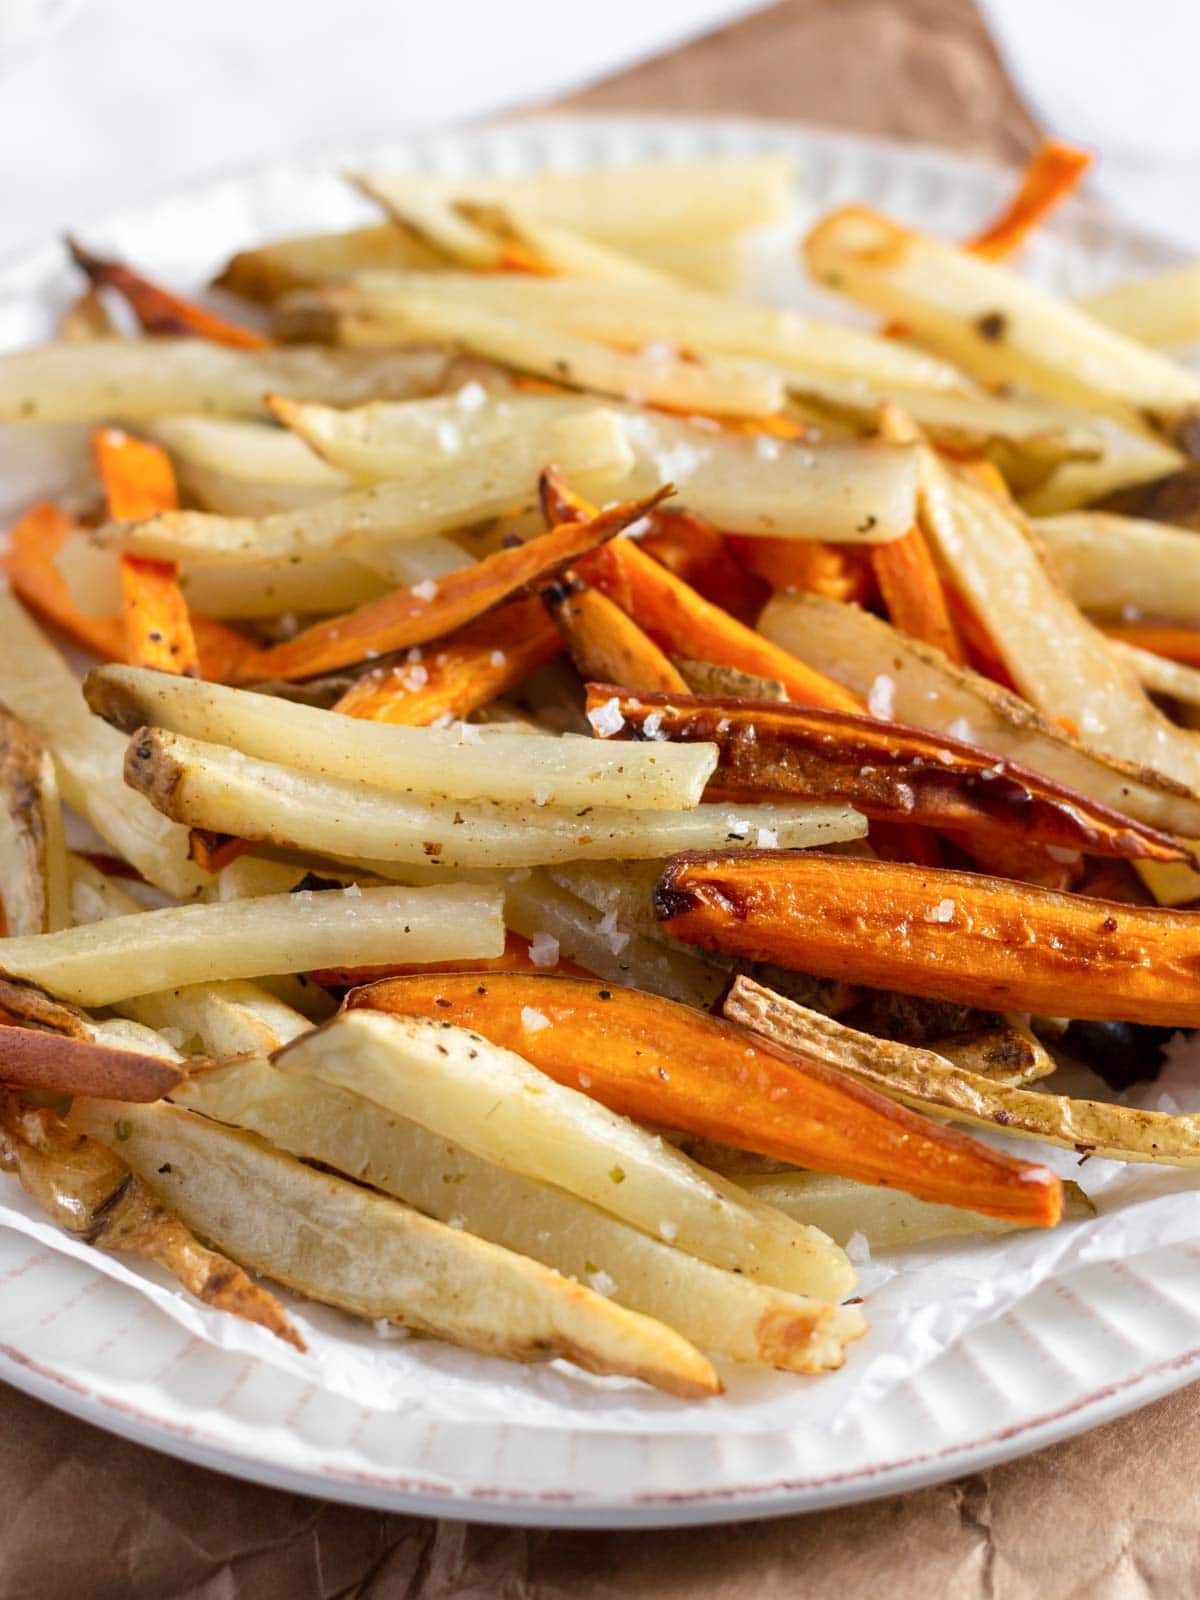 Assembly of homemade Vegan Fries and Sweet Potato Fries on a plate.